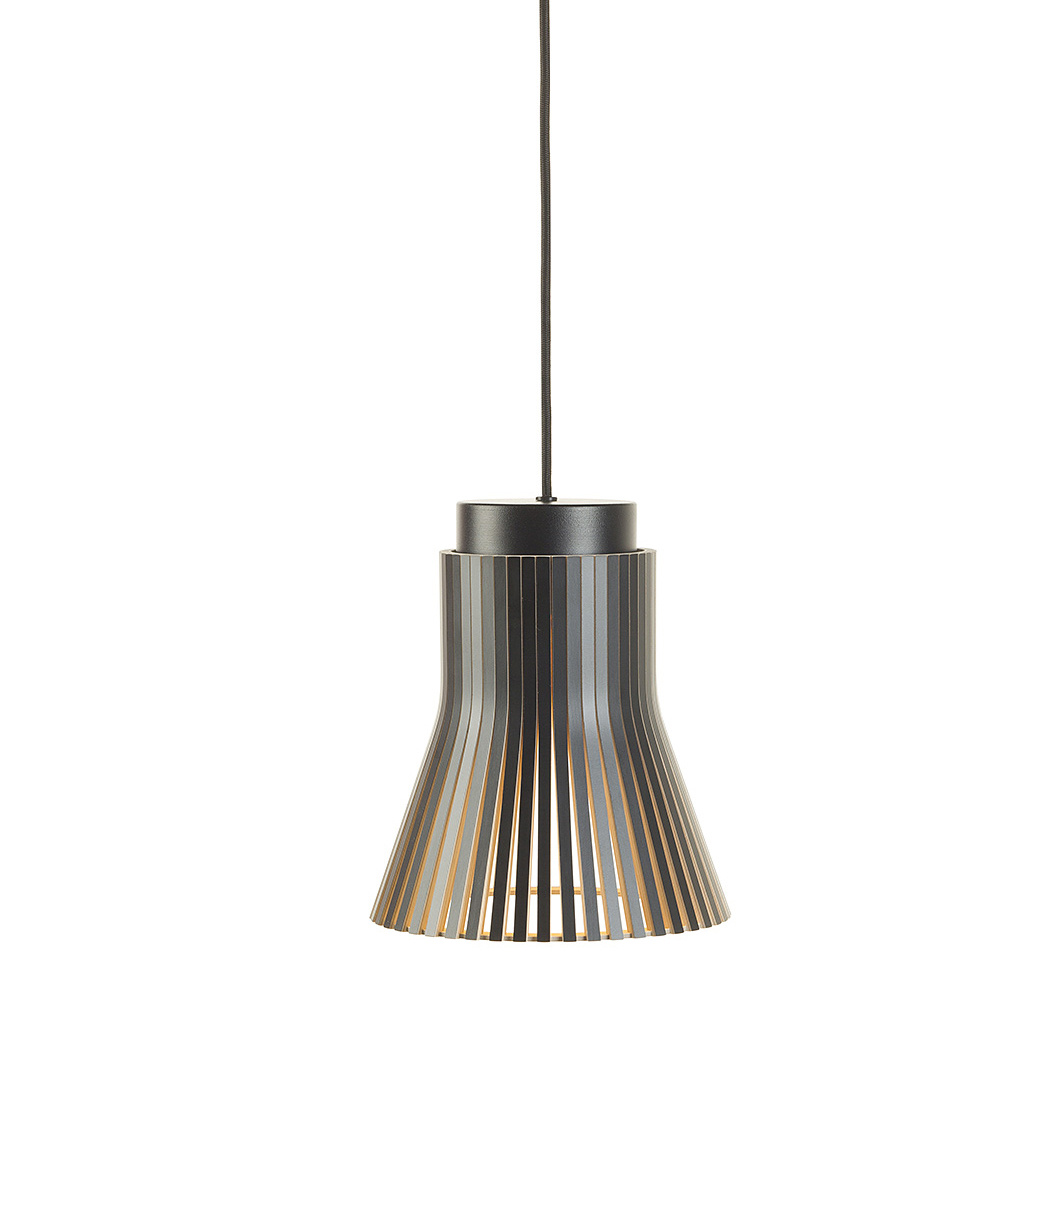 Petite 4600 pendant lamp is available in black laminated